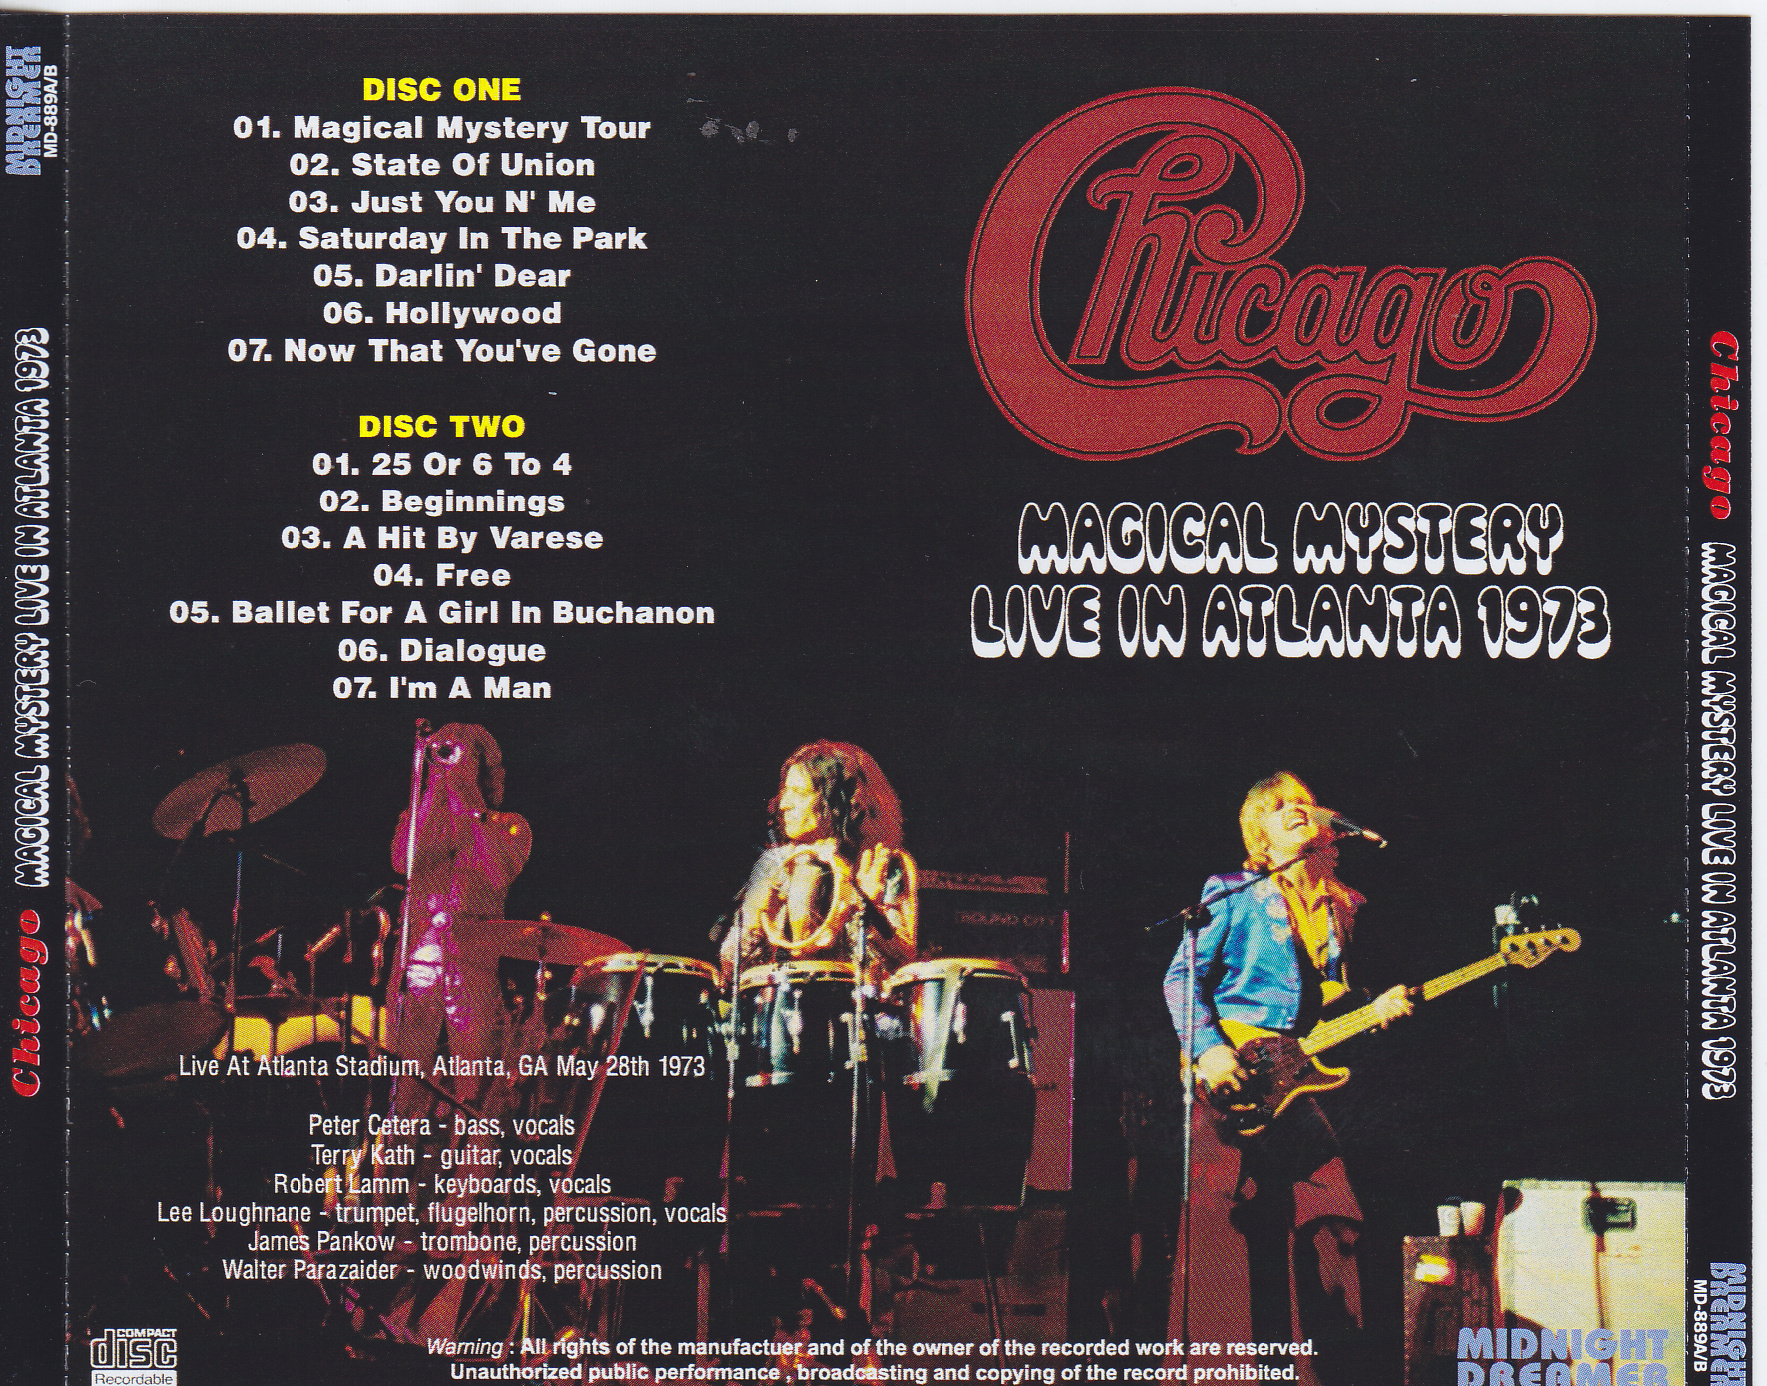 Chicago / Magical Mystery Live In Atlanta 1973 / 2CDR – GiGinJapan